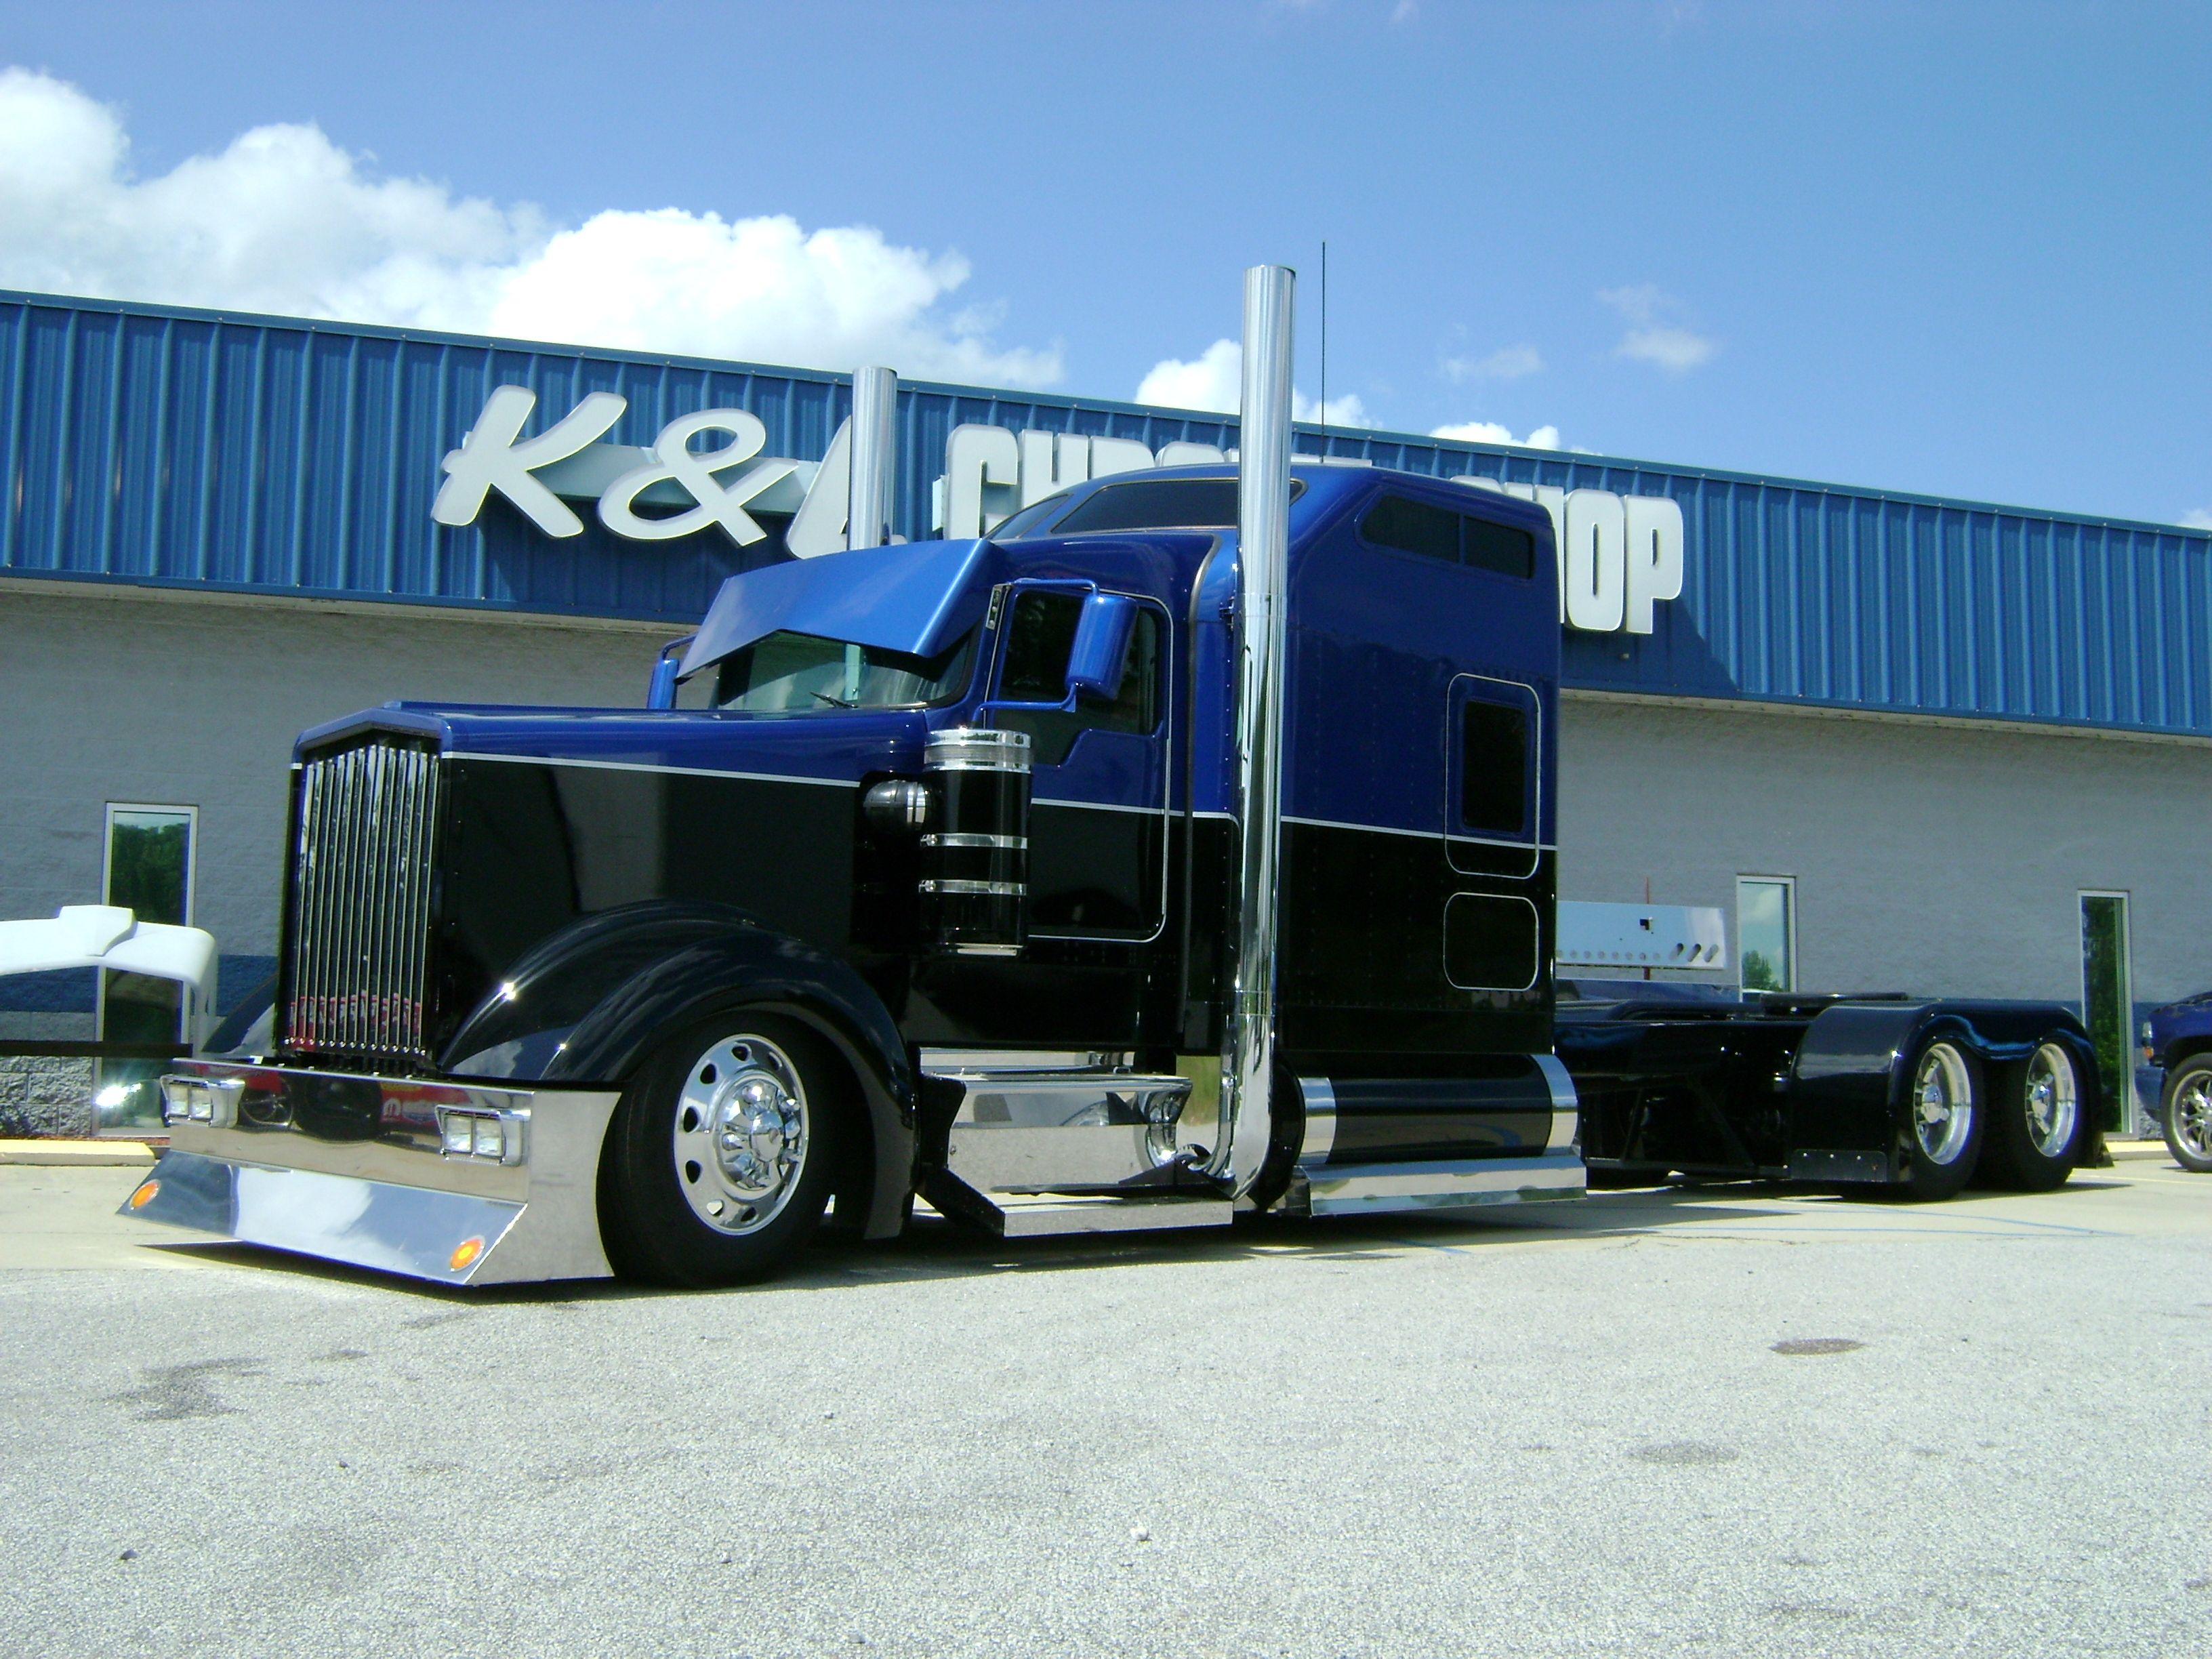 beauitiful customized big rigs. Chopped the inches, custom